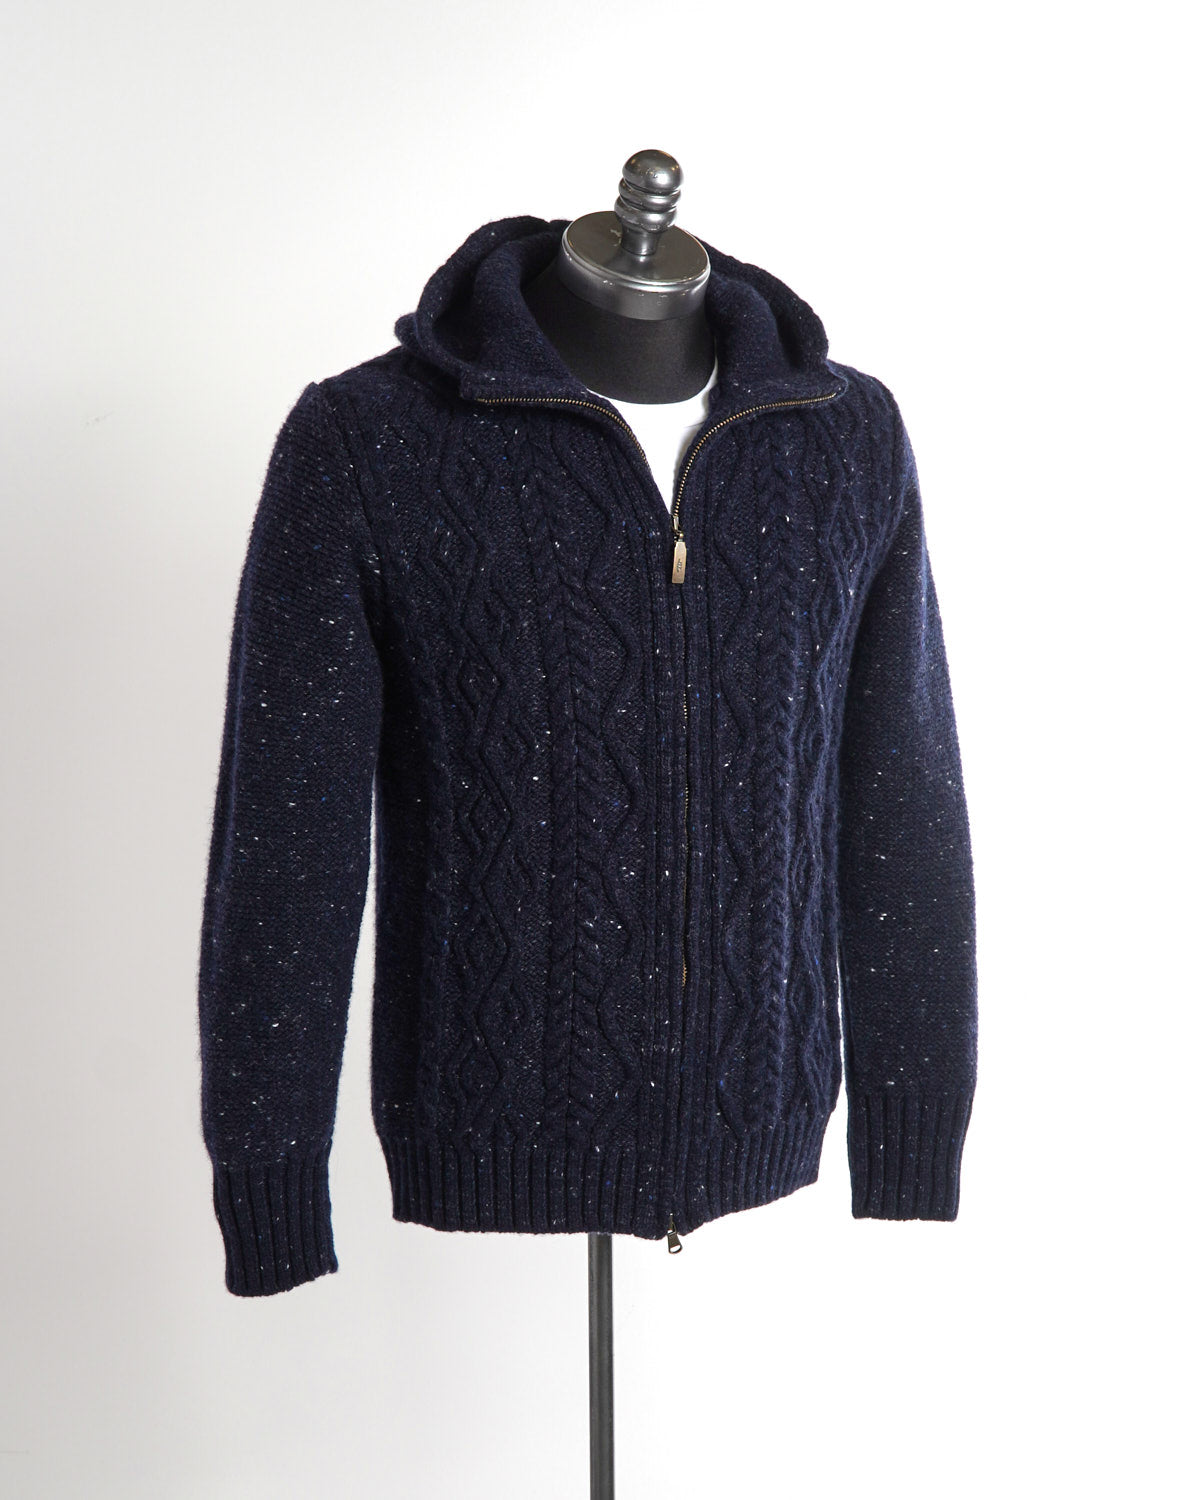 Inis Meáin Wool Cashmere Donegal Patent Aran Cable Crewneck